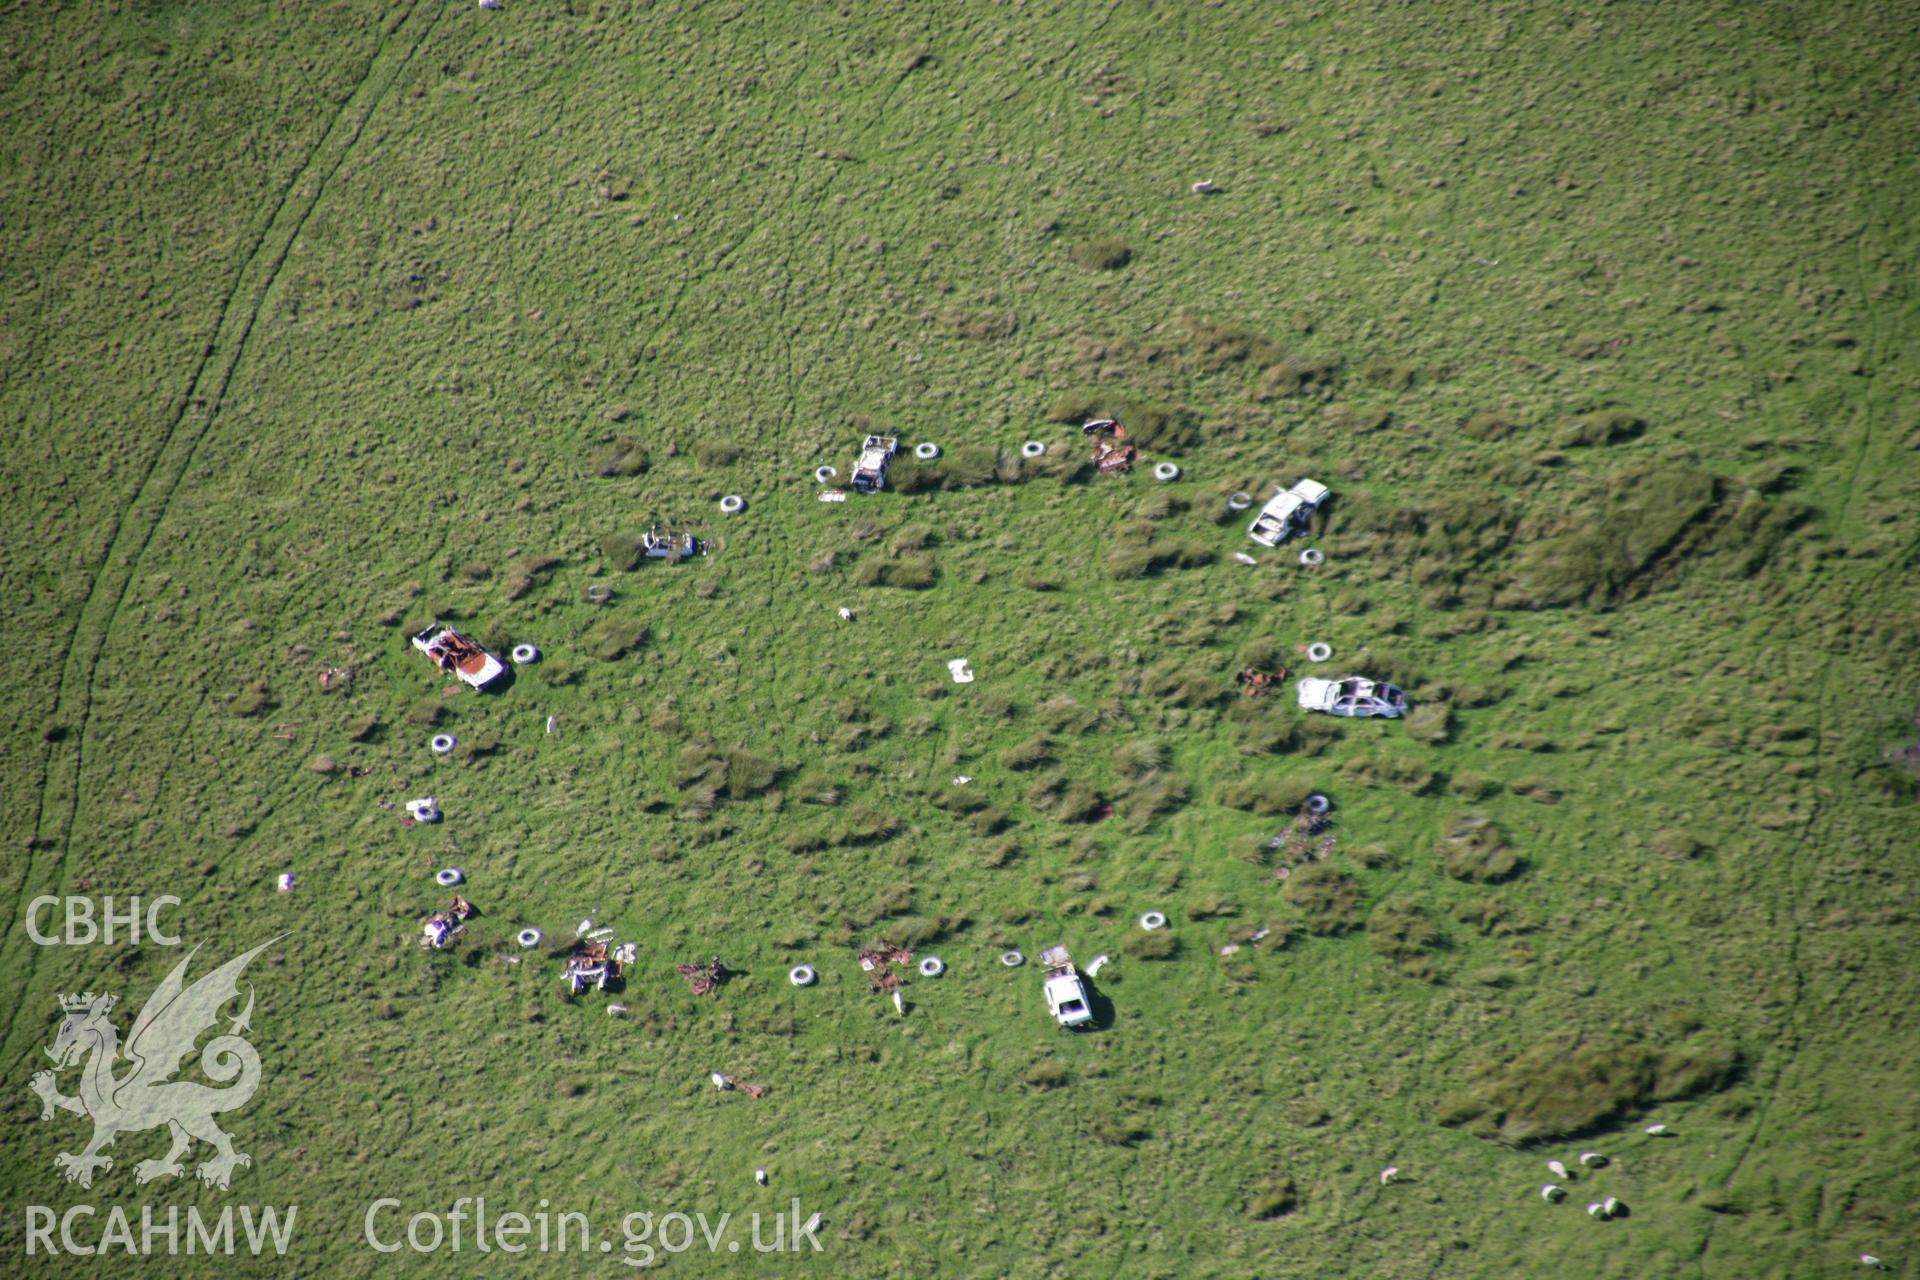 RCAHMW colour oblique aerial photograph of Sennybridge Military Training Area, Mynydd Epynt, showing a car target south of Garn Wen. Taken on 08 August 2007 by Toby Driver